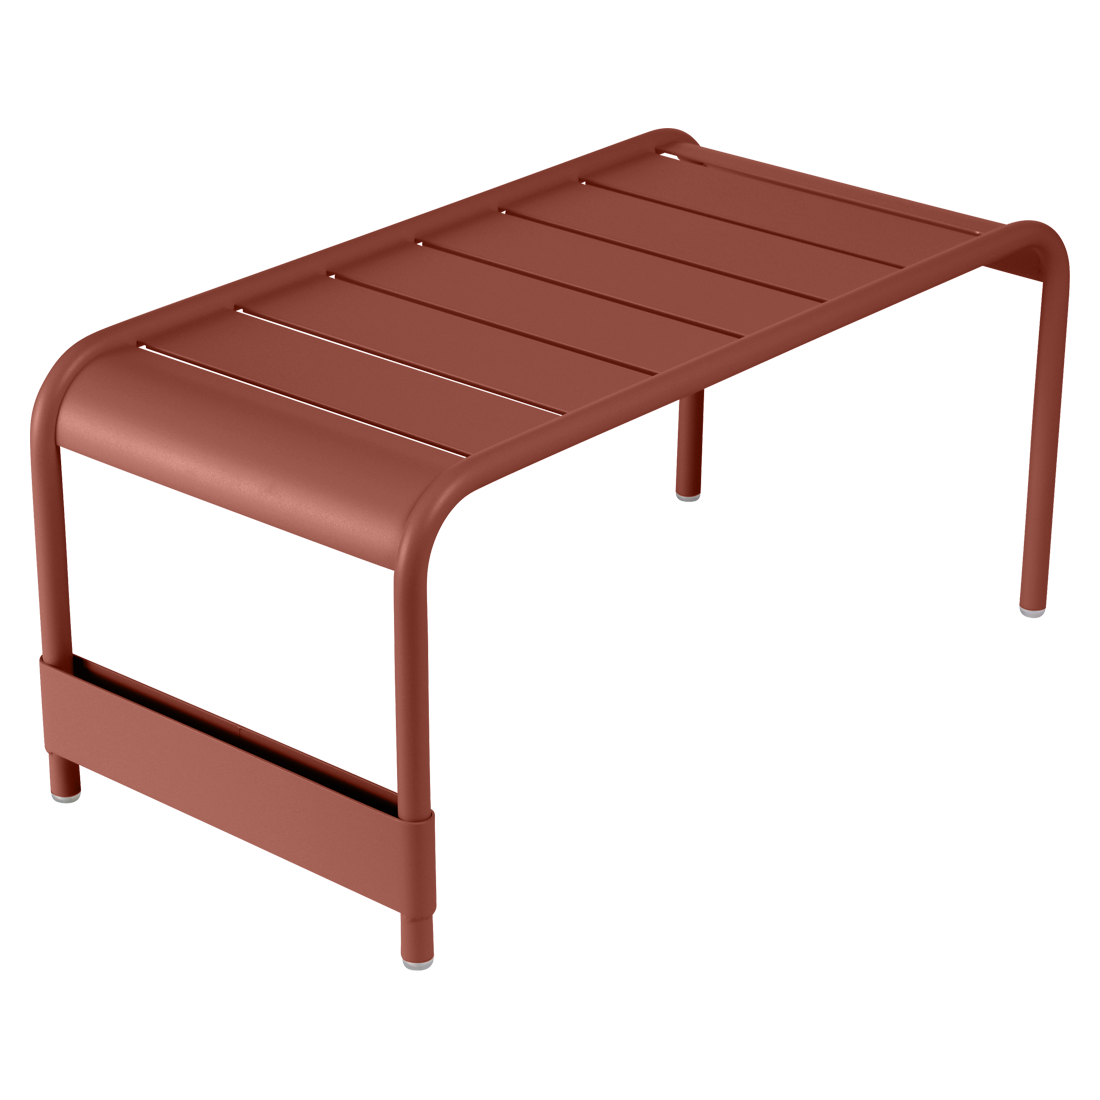 Grande table basse / Banc luxembourg ocre rouge